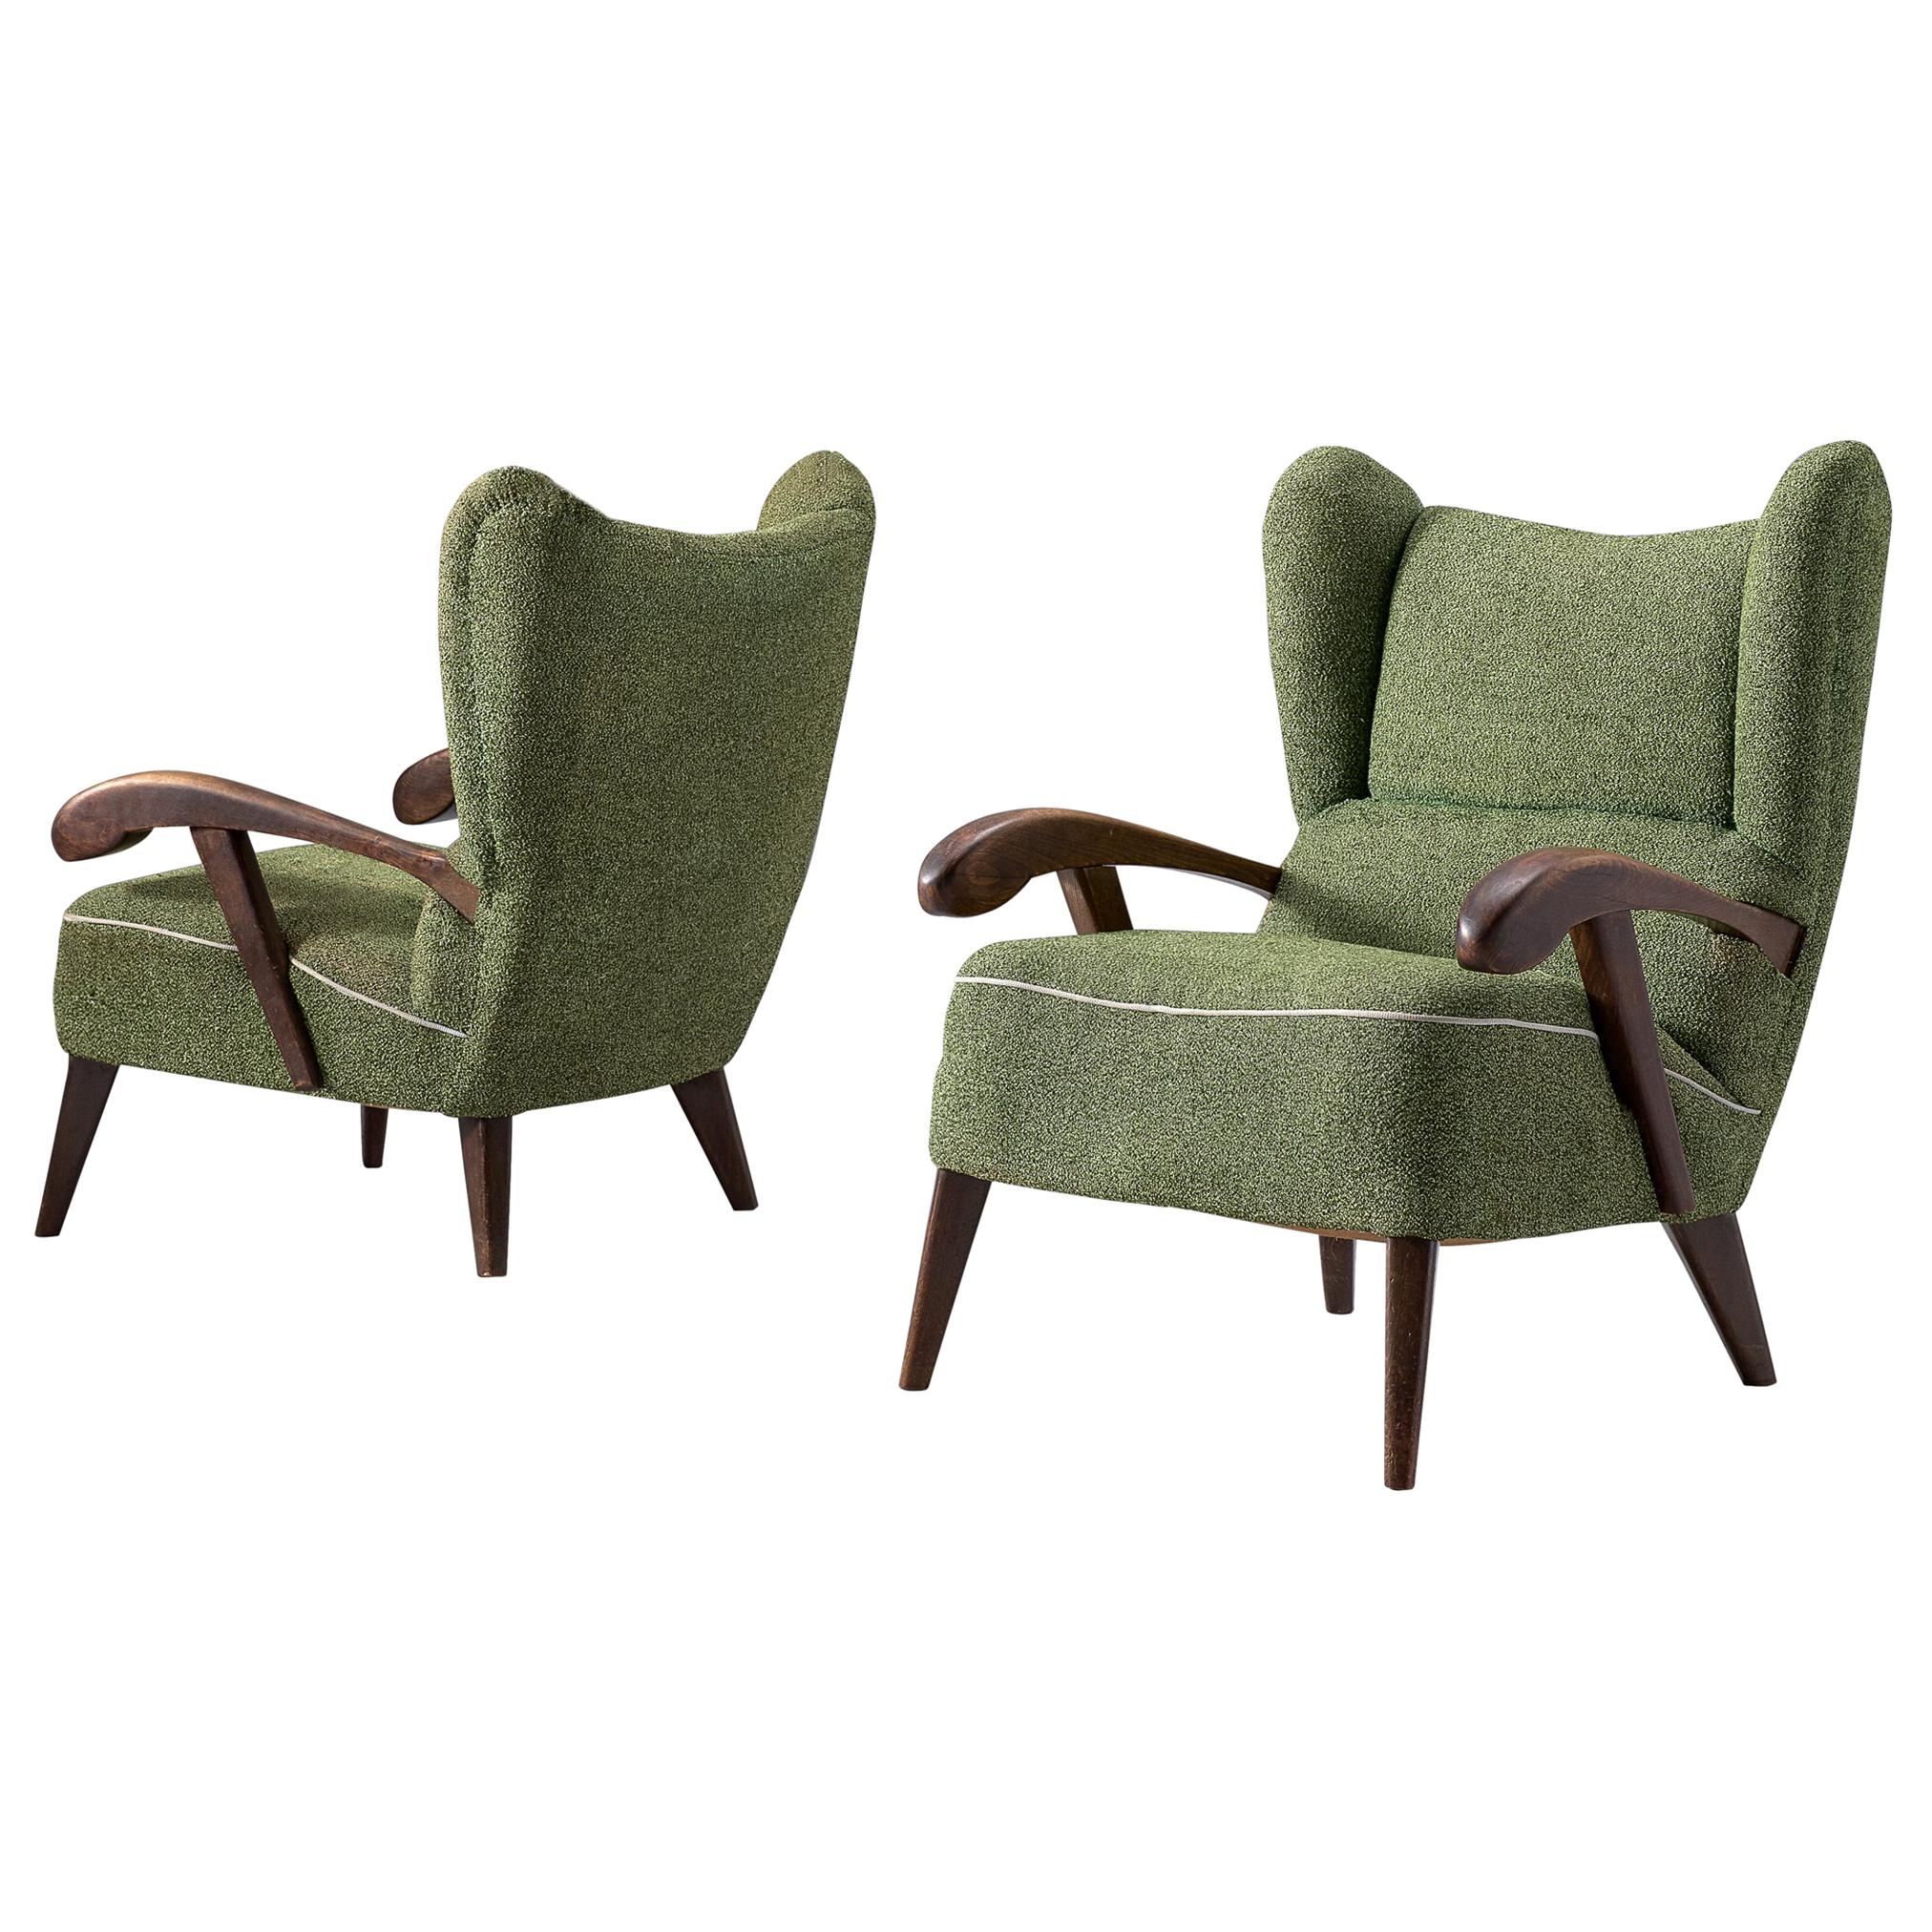 Pair of Armchairs to be Reupholstered, 1950s